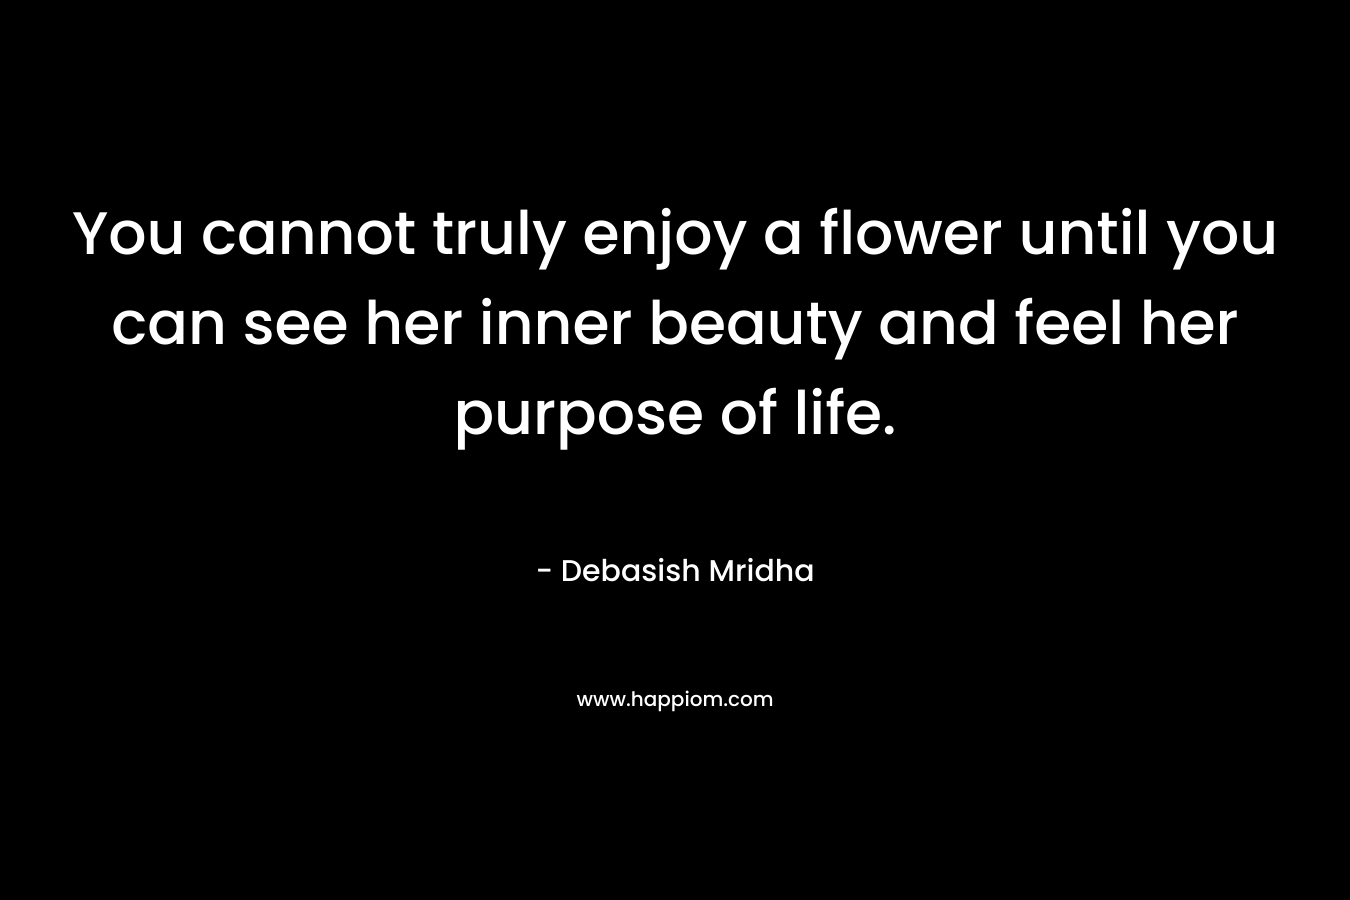 You cannot truly enjoy a flower until you can see her inner beauty and feel her purpose of life.